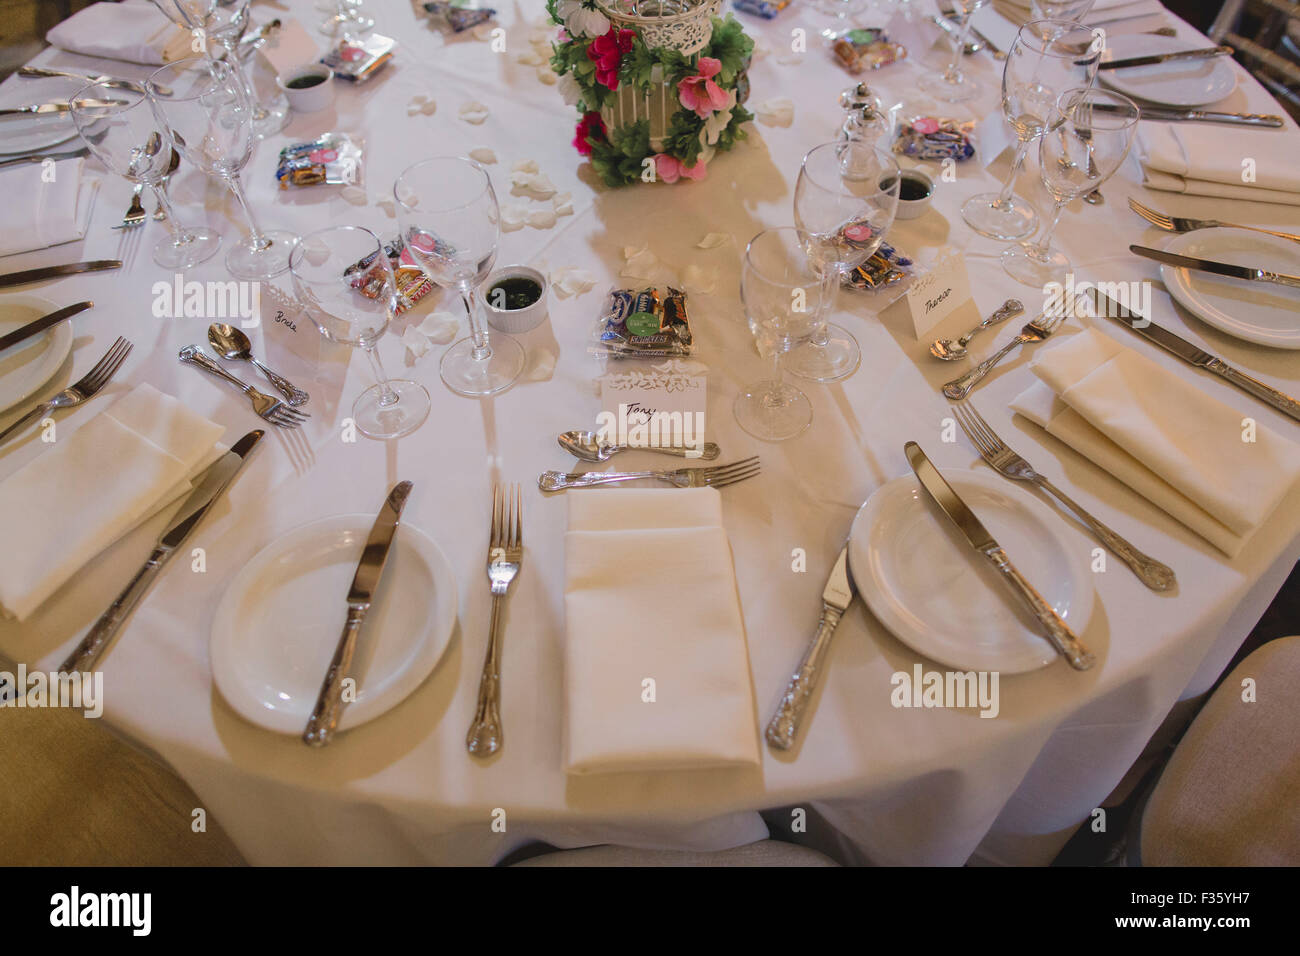 Wedding Table Place Settings Stock Photo